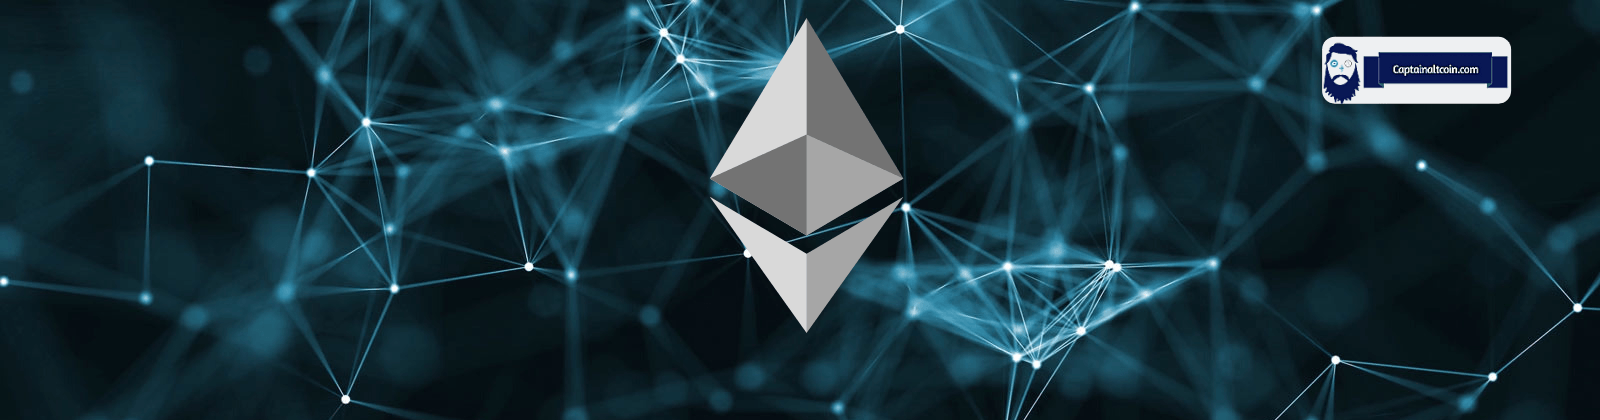 Web bot predictions ethereum netdania forex